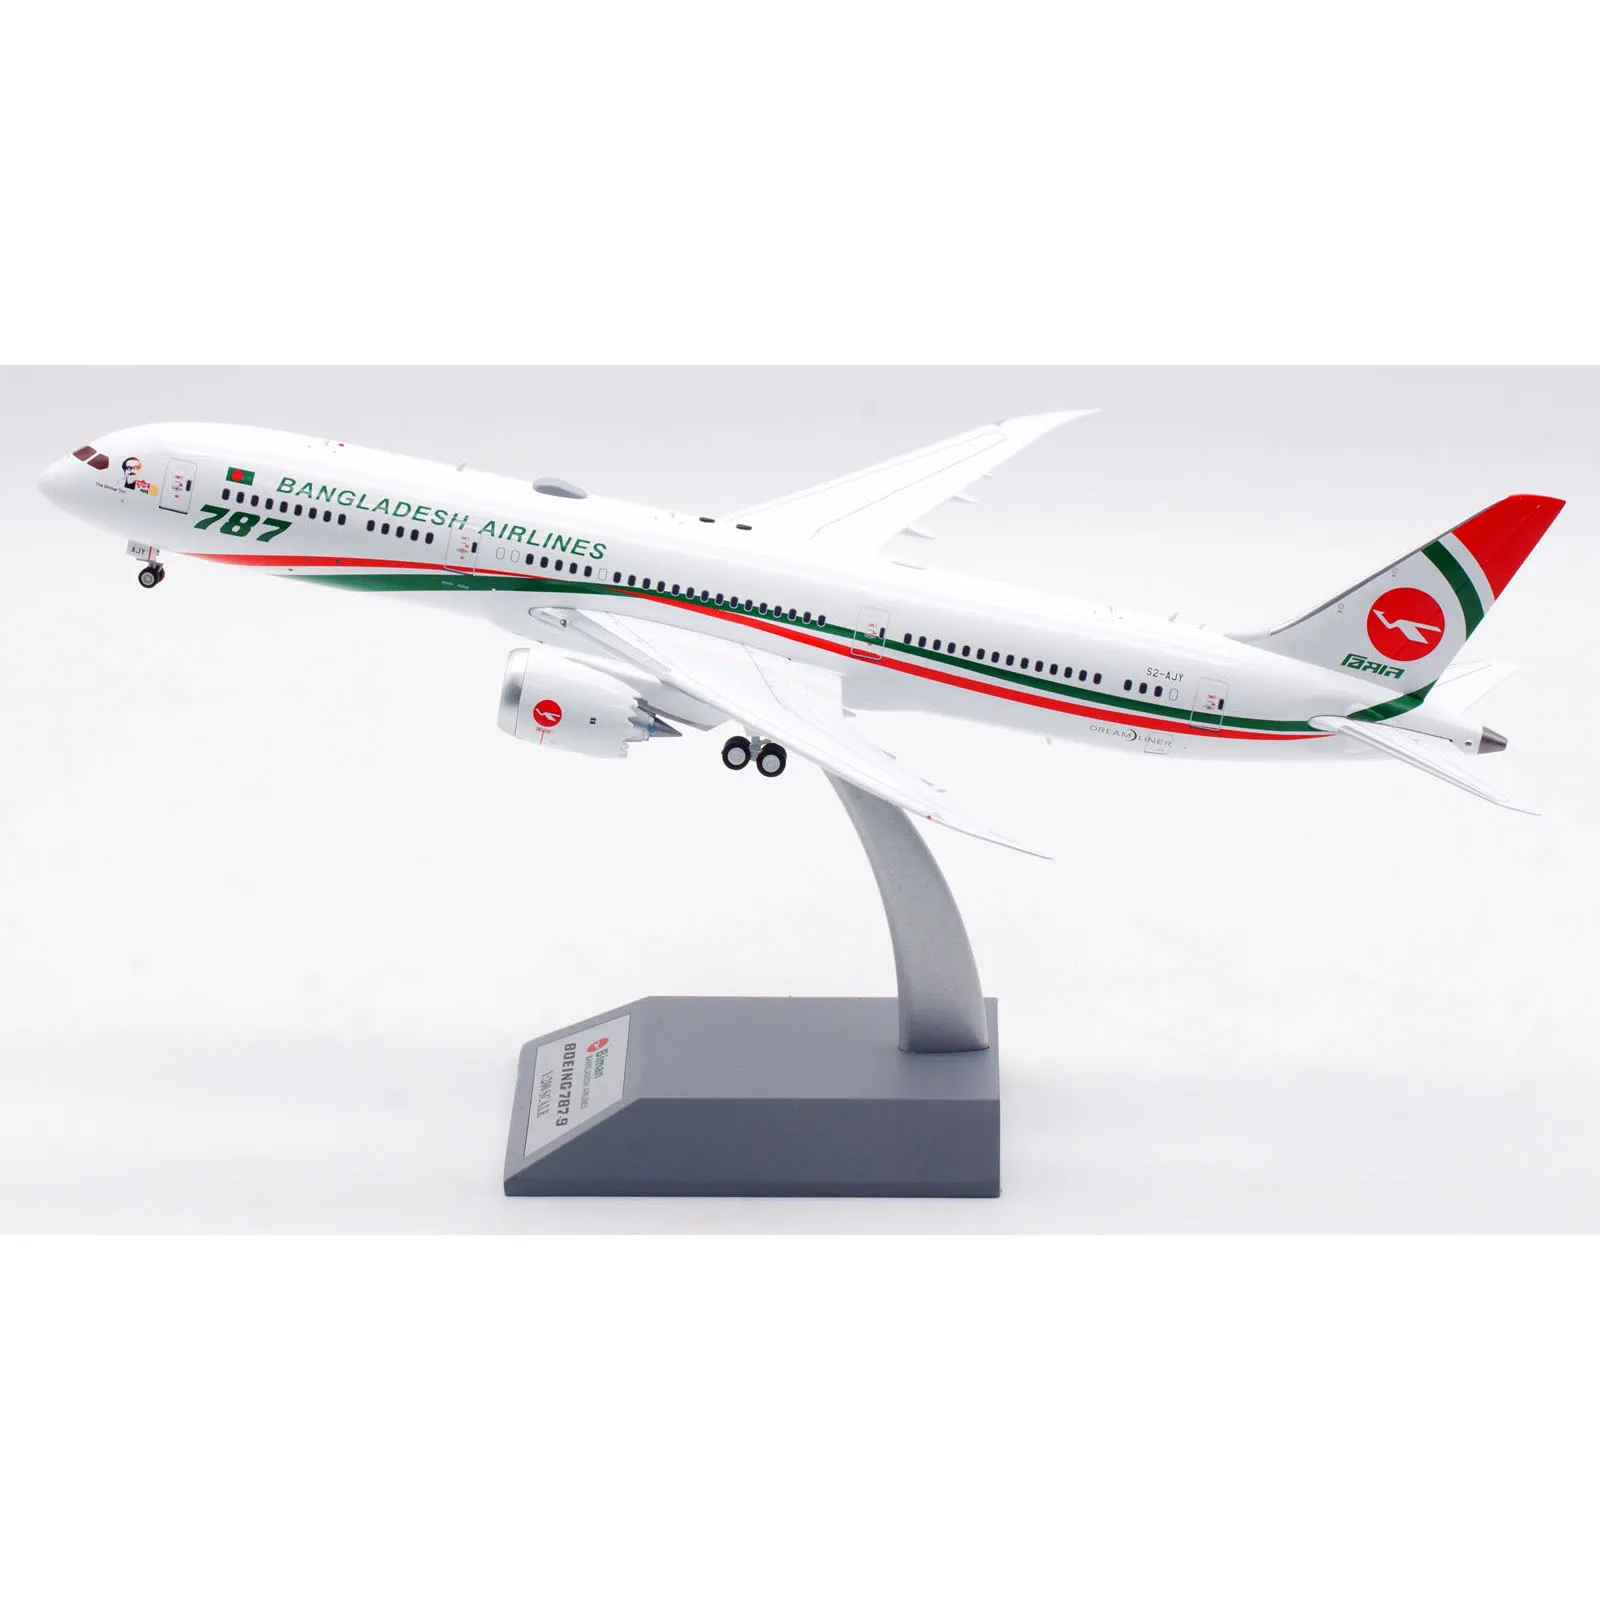 IF789EY1123 Alloy Collectible Plane Gift INFLIGHT 1:200 Biman Bangladesh Airlines Boeing B787-9 Diecast Aircraft Model S2-AJY